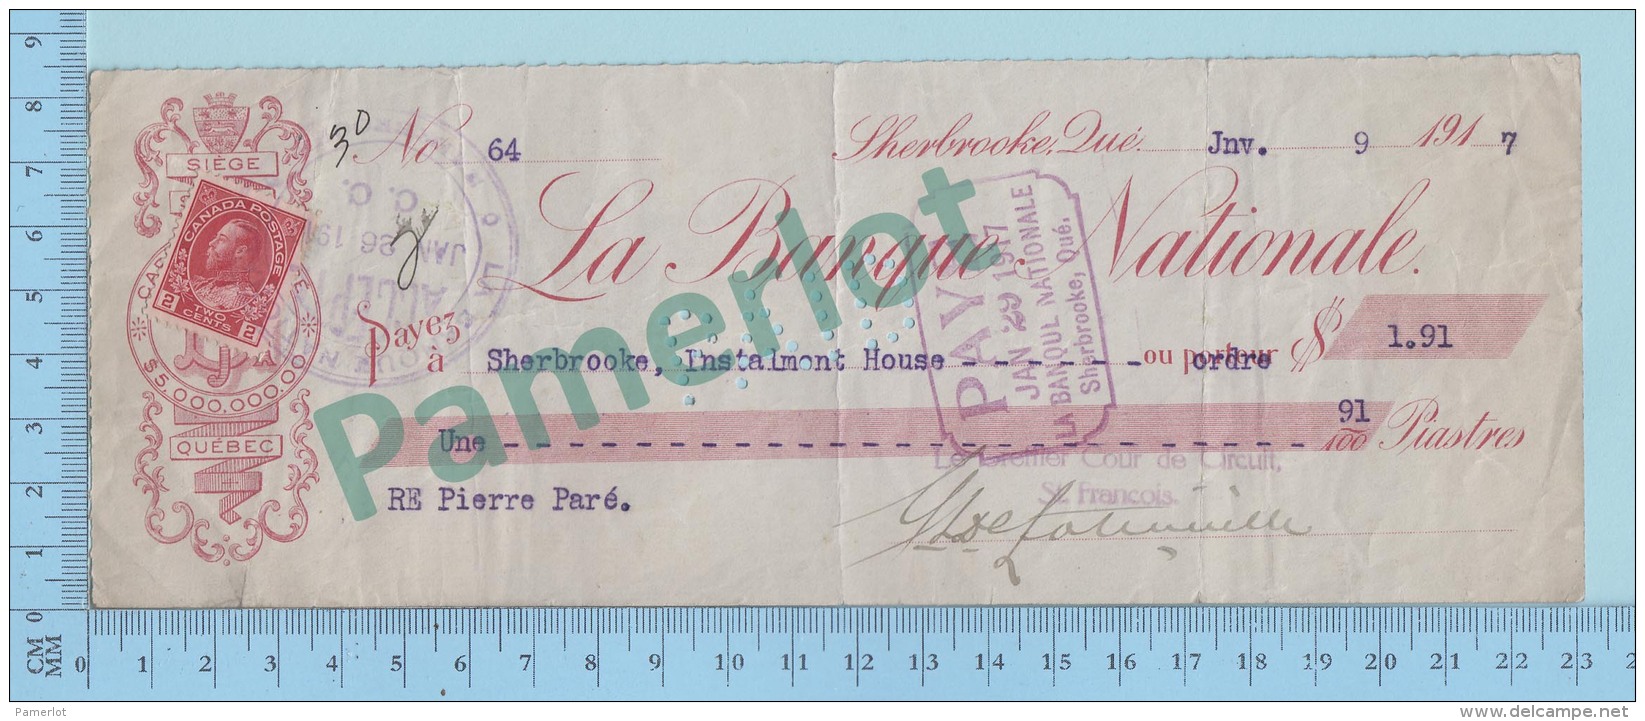 Cheque Timbre Taxe - La Sherbrooke Instalment House Sur Wellington Nord , Sherbrooke Quebec 1917, $1.95 - 2 Scans - Cheques & Traveler's Cheques